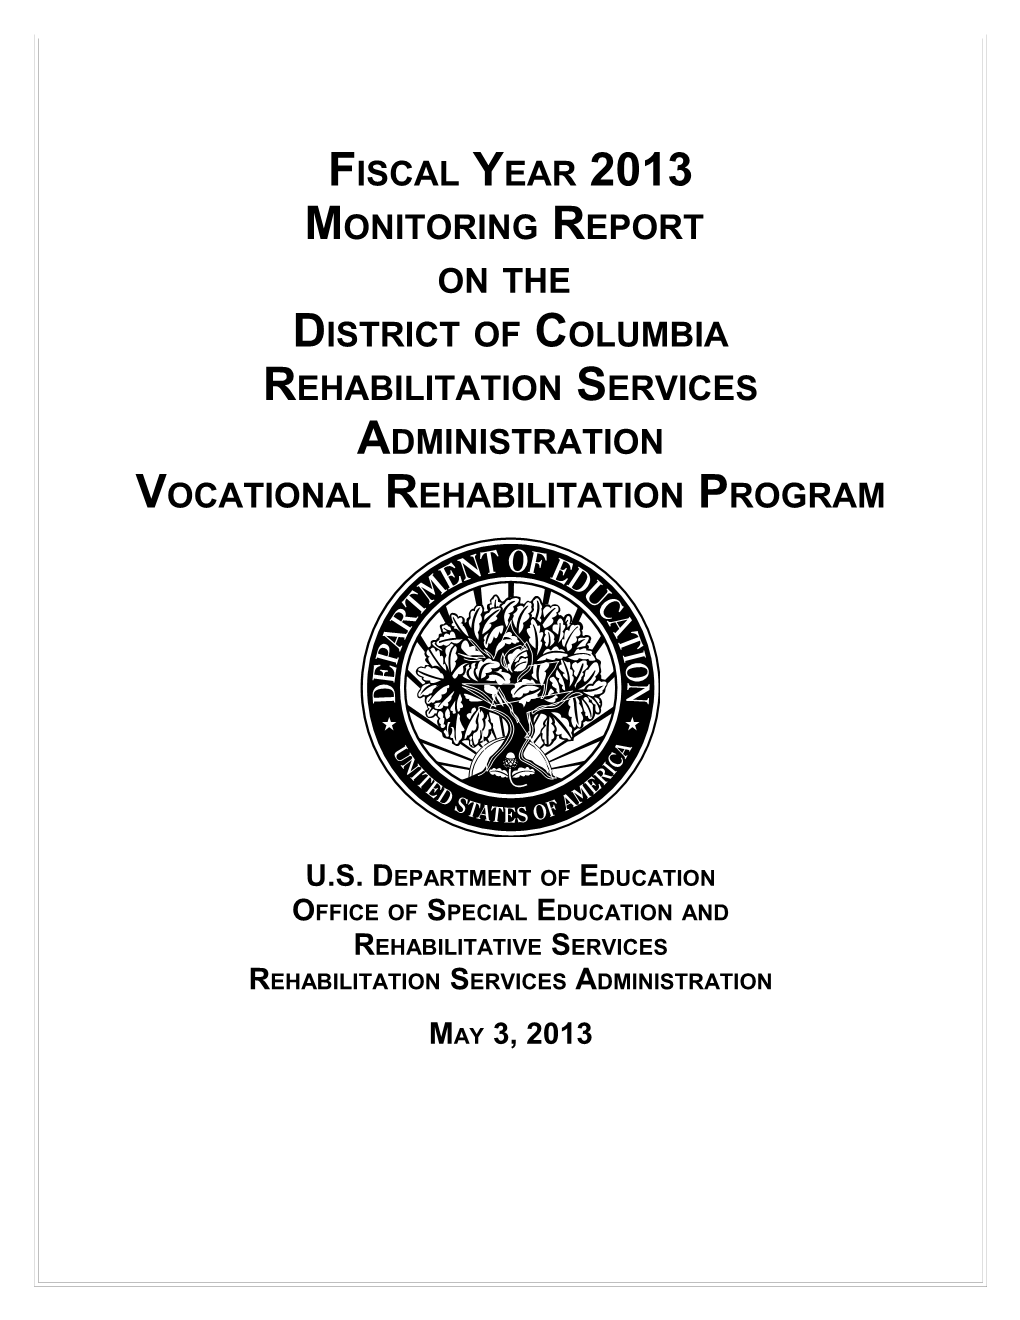 Fiscal Year 2013 Monitoring Report on the District of Columbia Rehabilitation Services